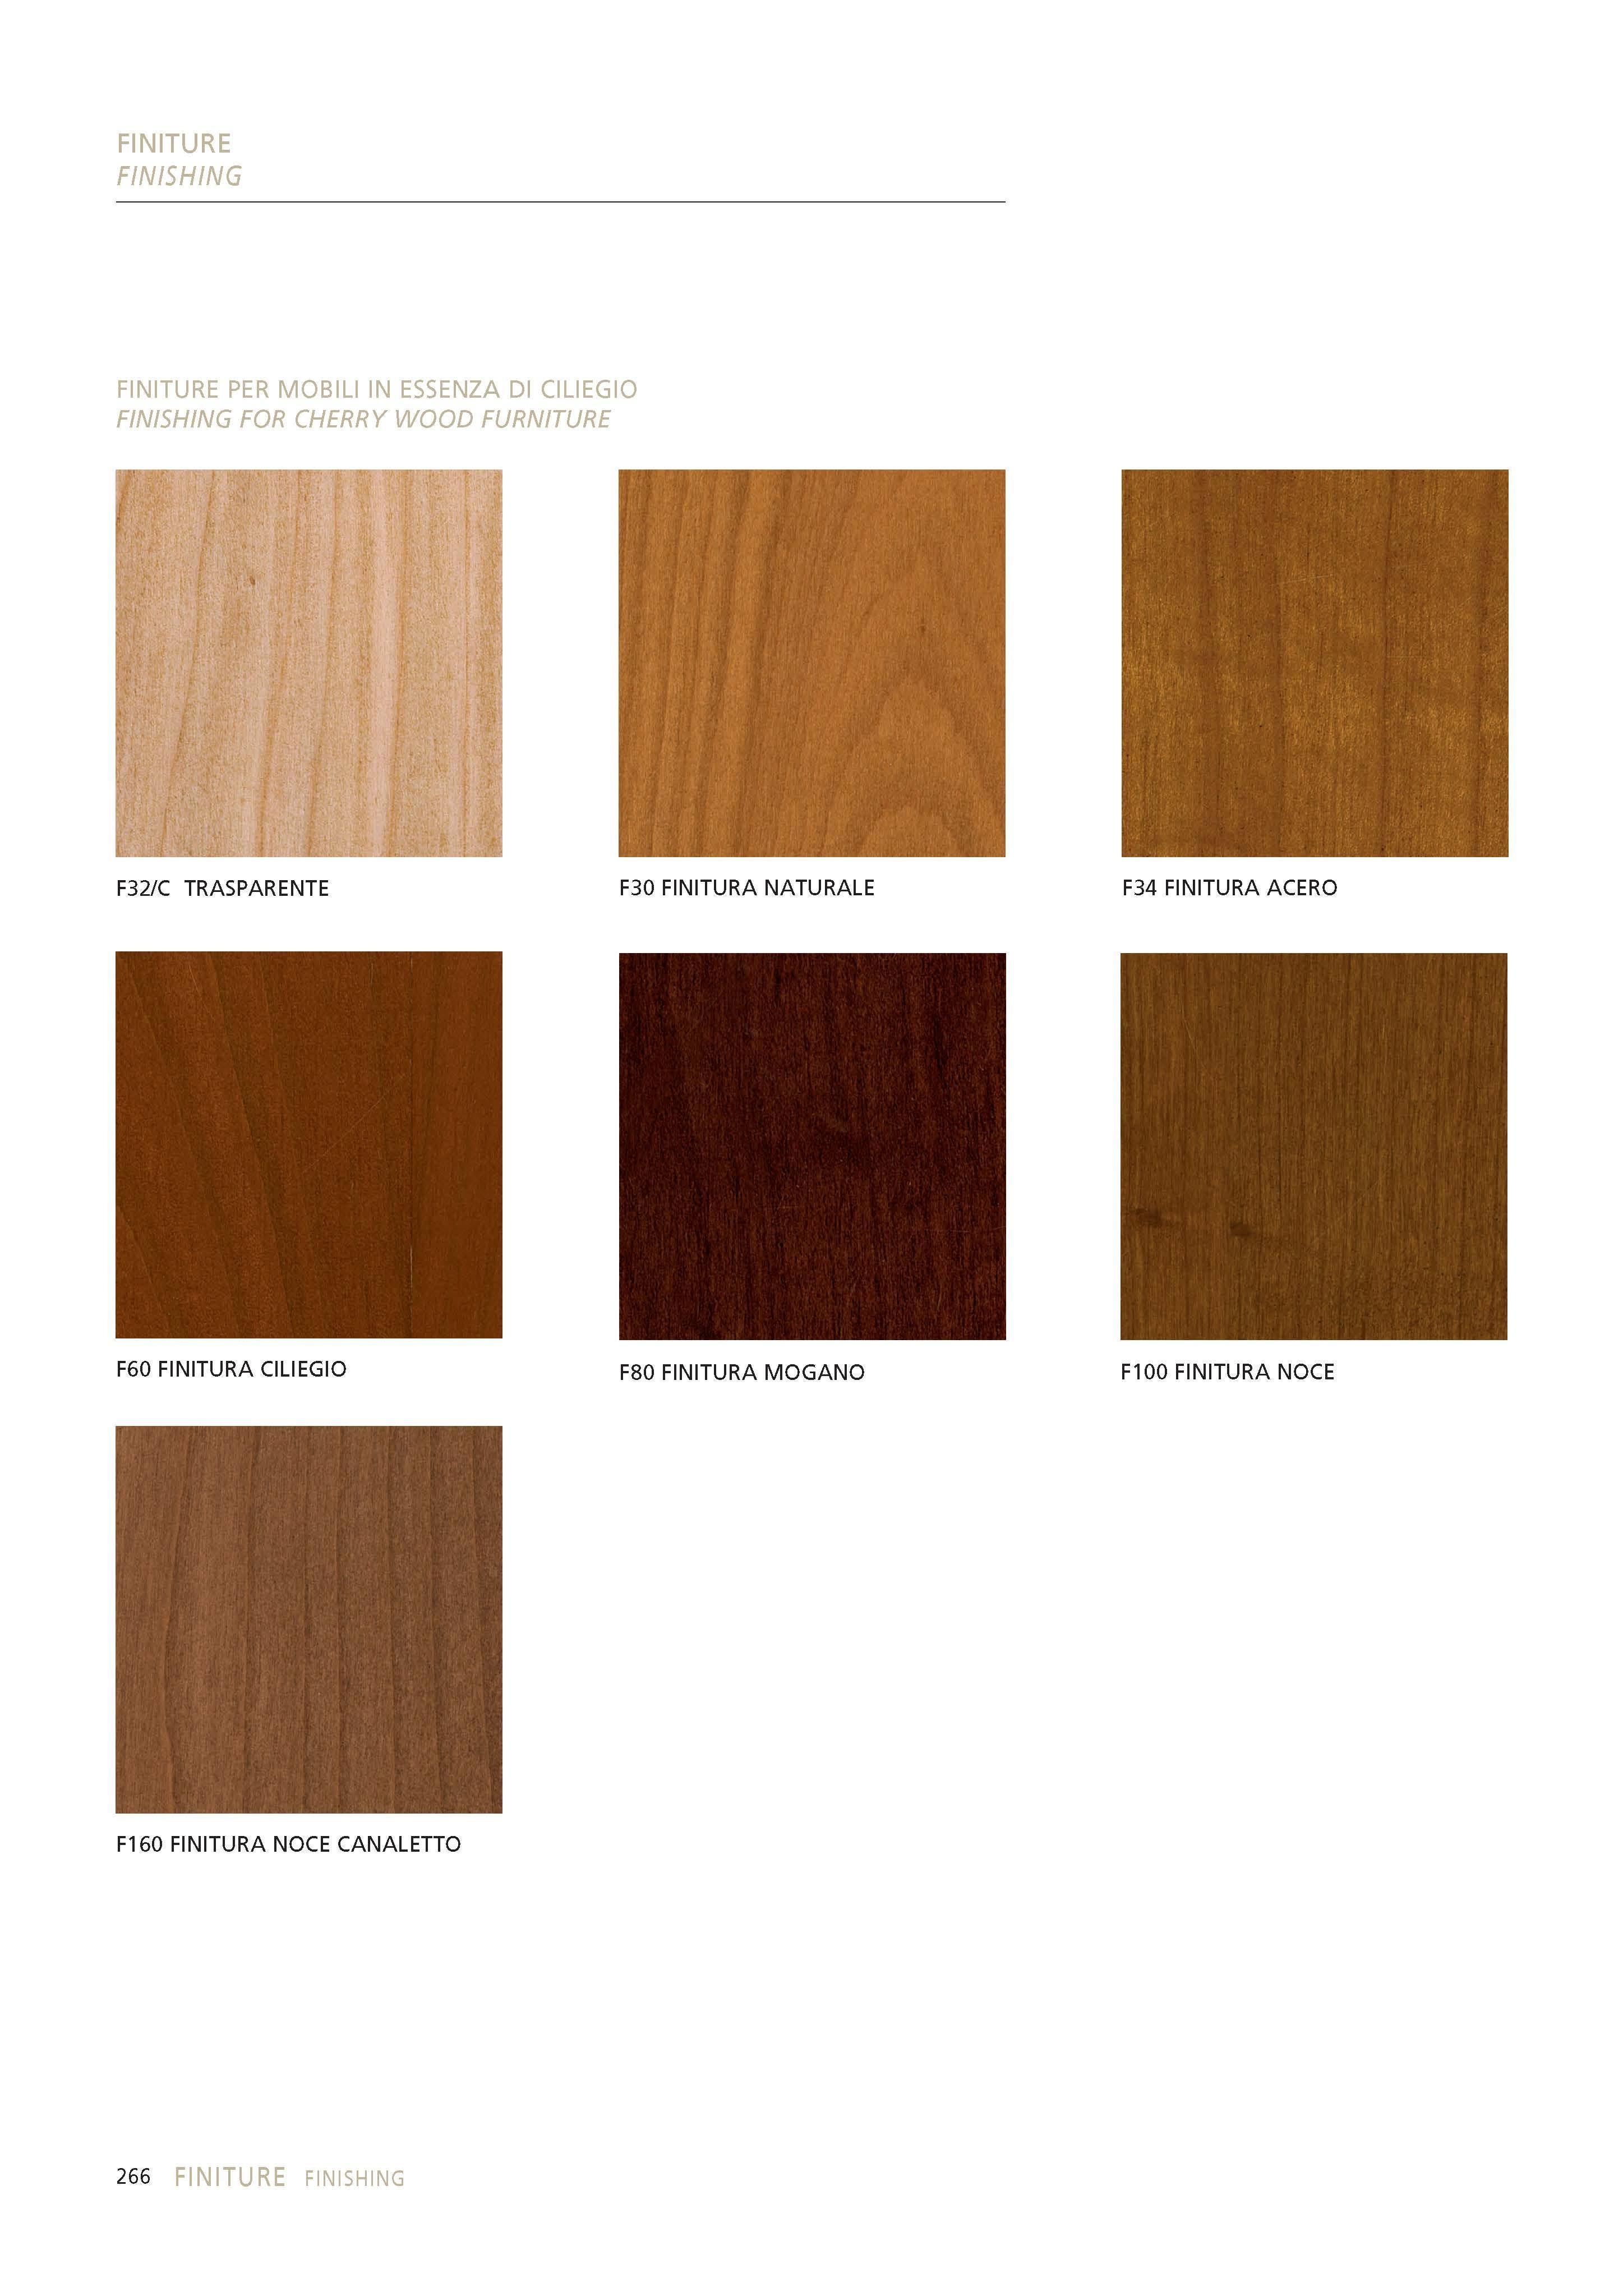 This listing refers to the purchase of samples, wood or coatings, to help you choose the best combination for your furniture.
This cost will then be deducted from the purchase price of the finished product

Images are indicative only

It includes